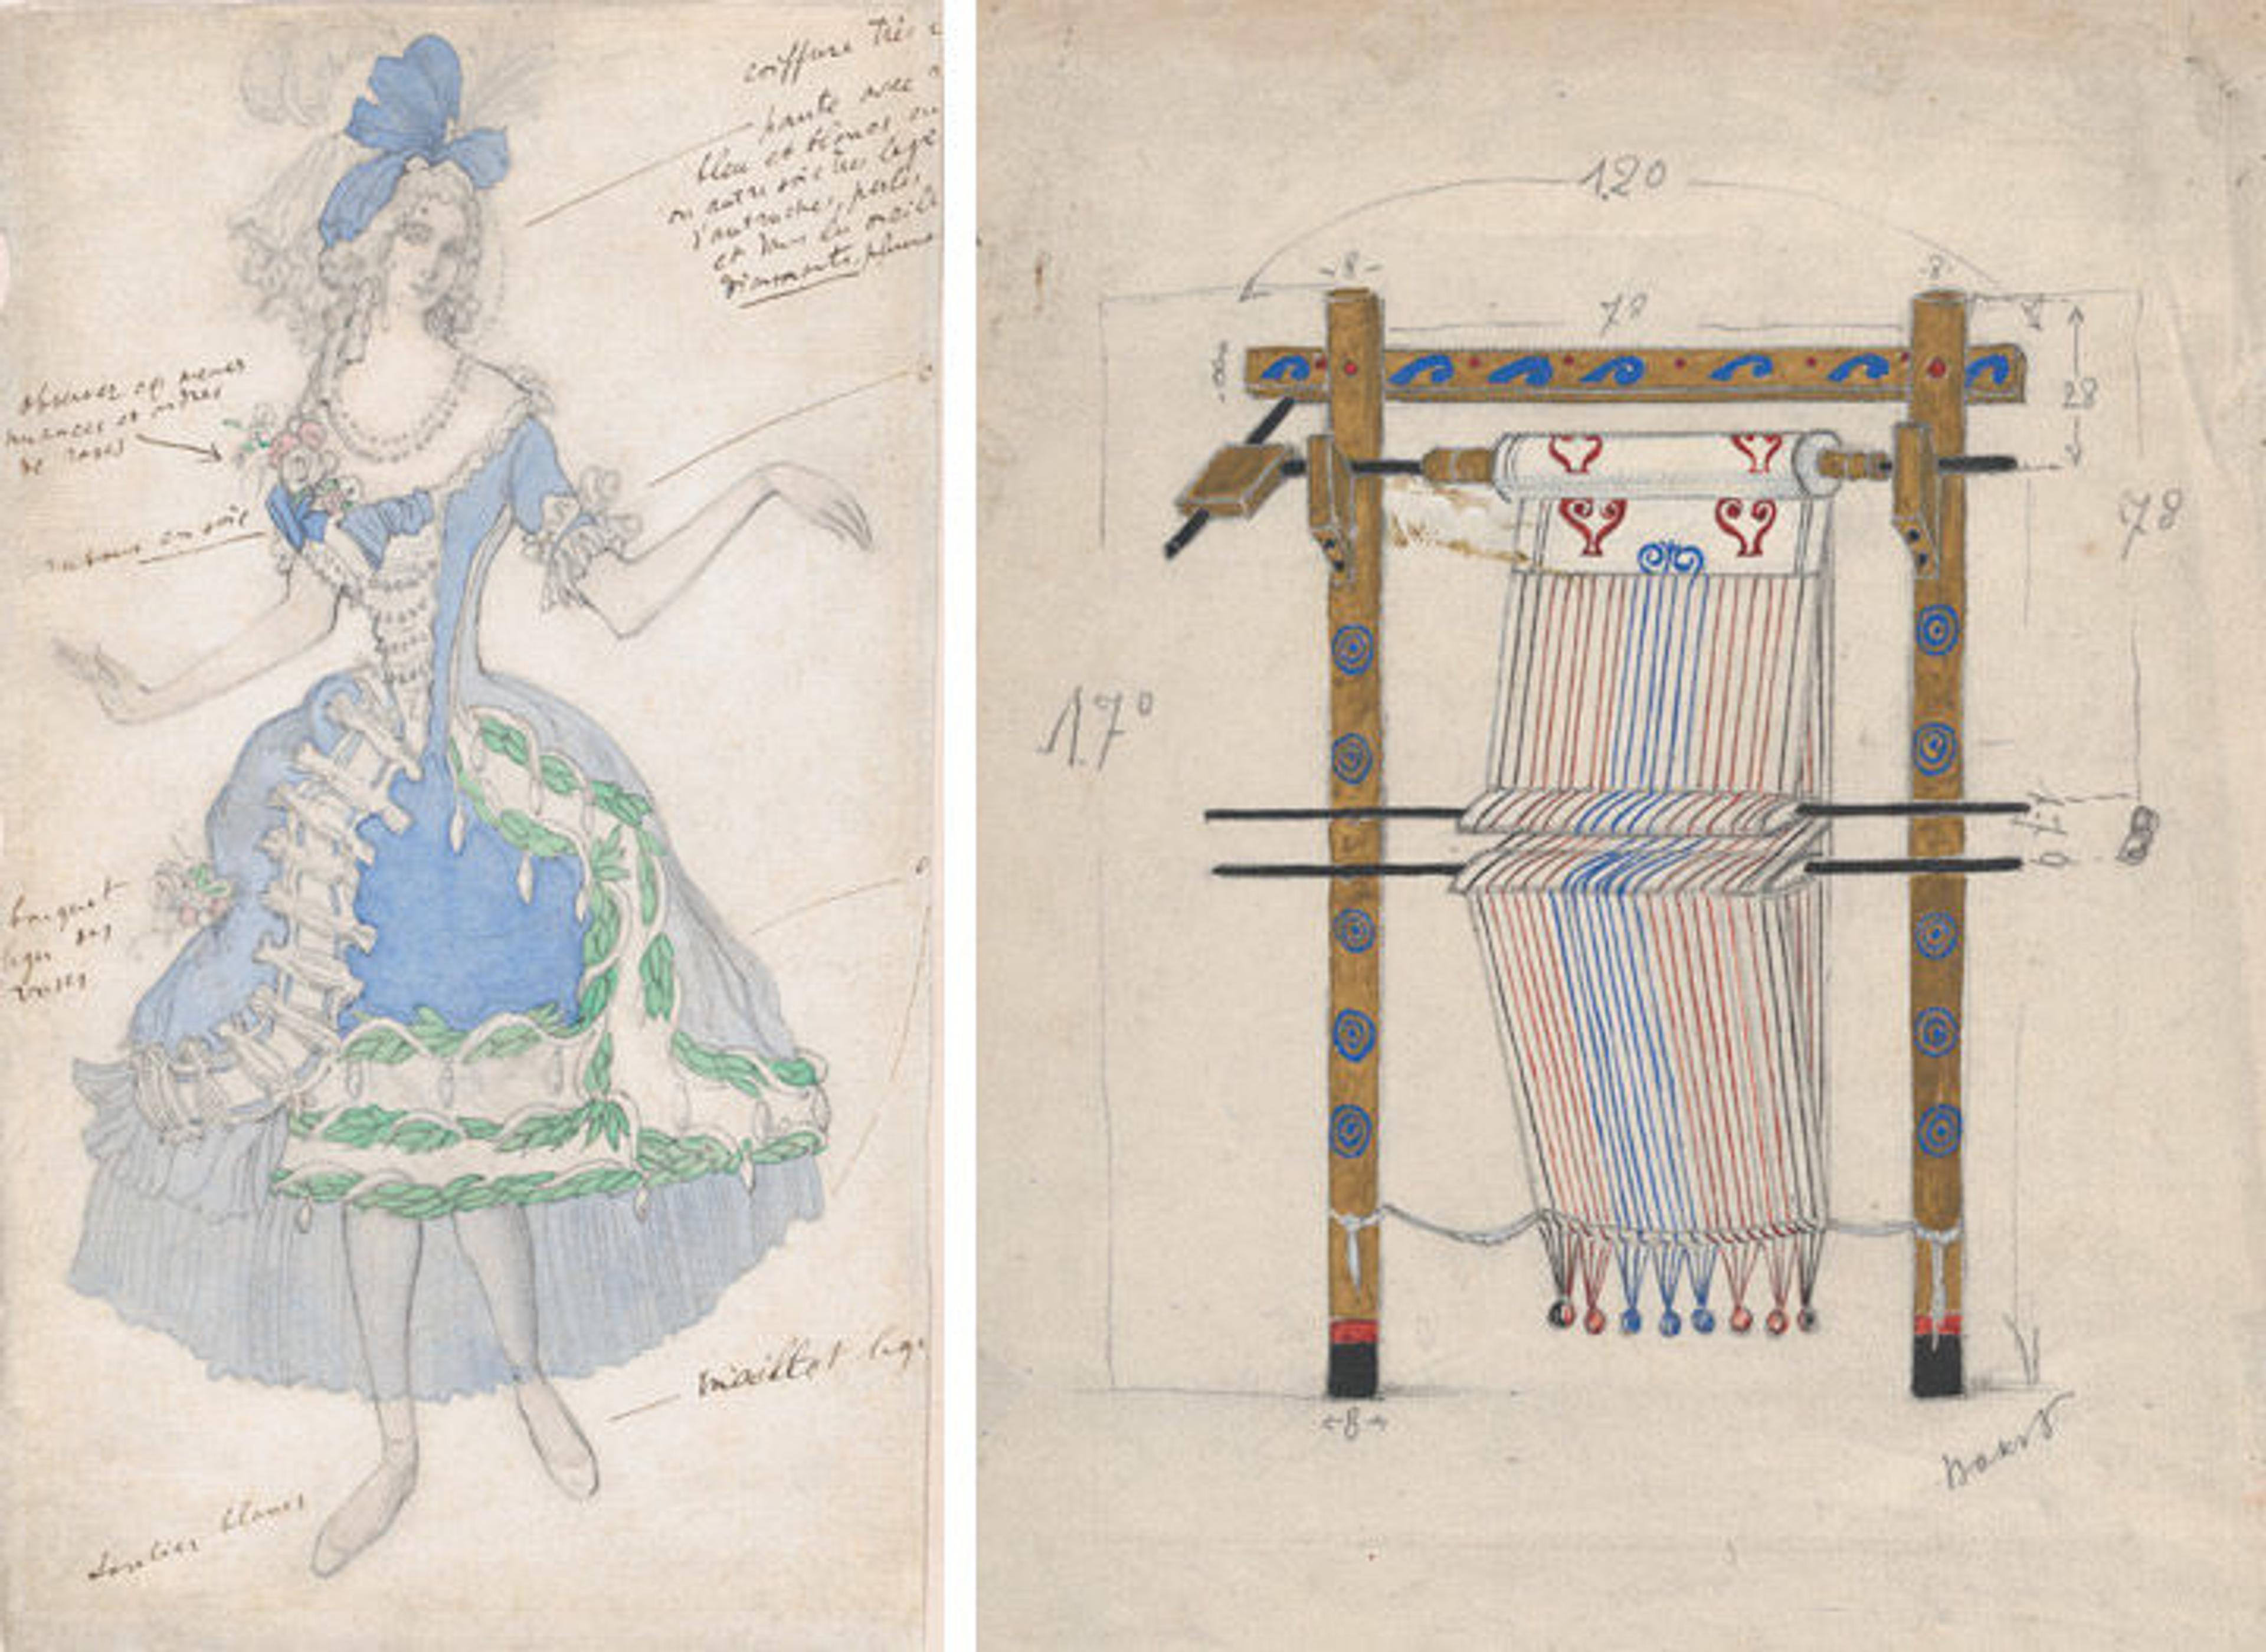 Two designs by Leon Bakst for the Ballet Russes